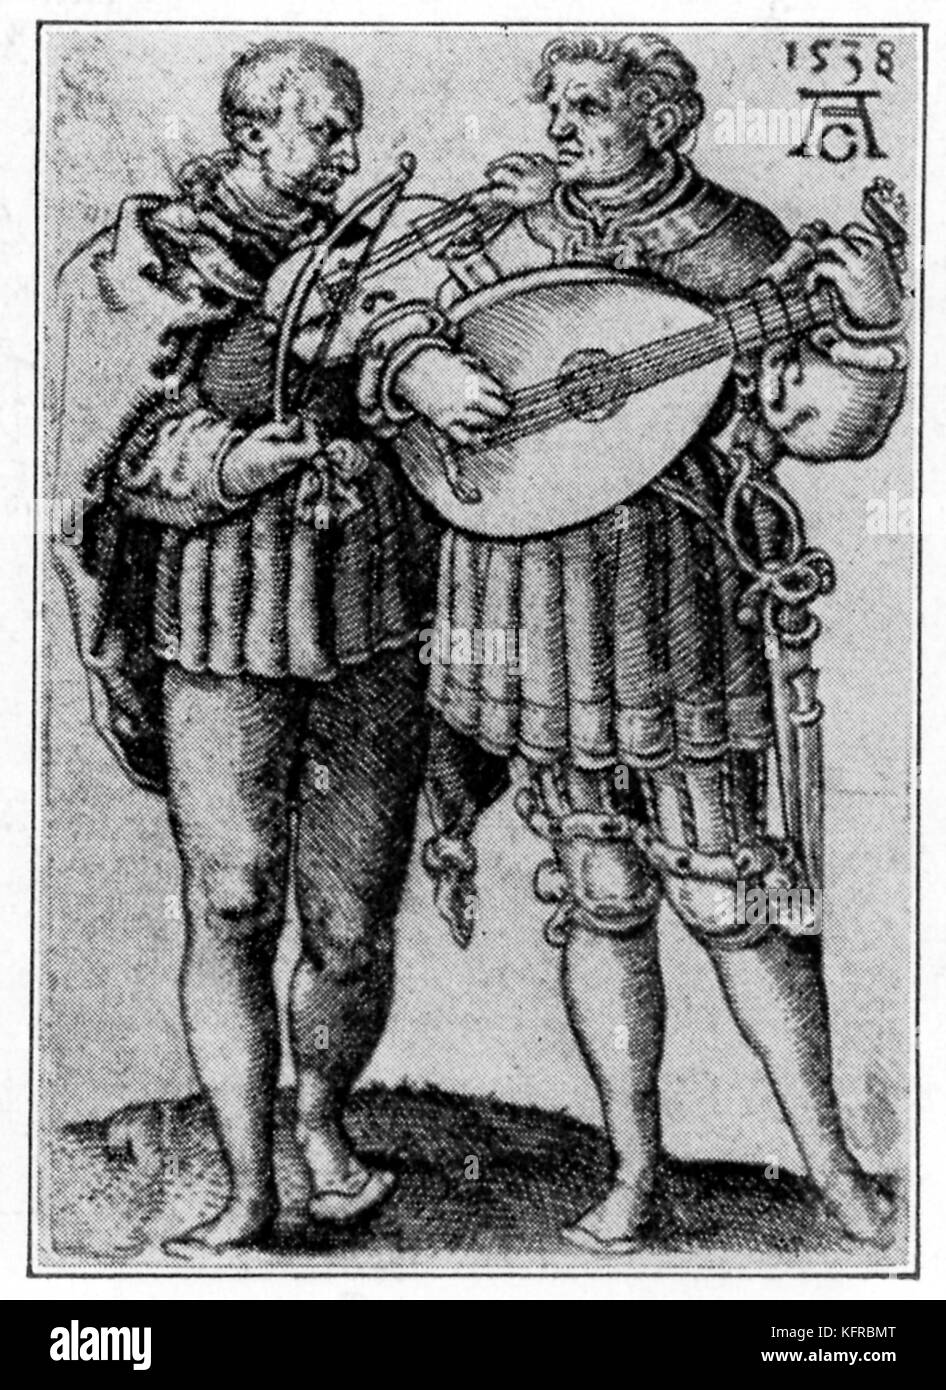 Viol and lute players (1538). Engravings from the 'Hochzeitstanzer' series by Heinrich Aldegrever. HA: German painter and engraver, 1502–1555 or 1561. Stock Photo